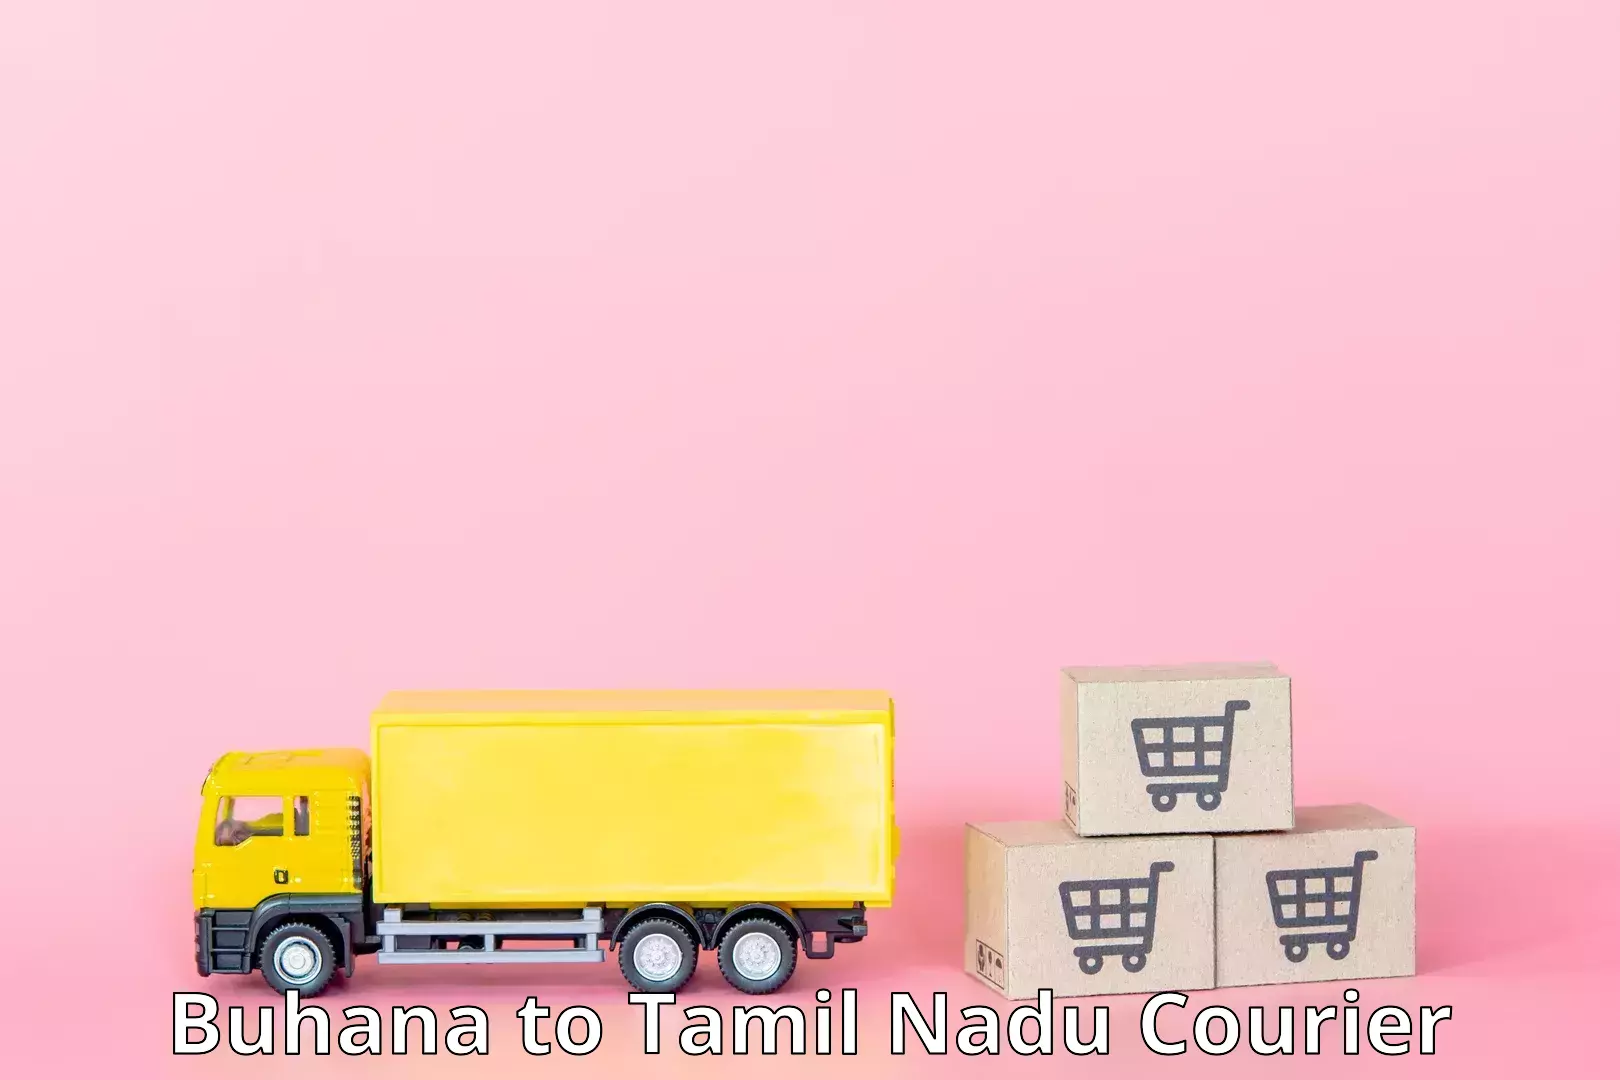 24/7 courier service in Buhana to Tiruvallur